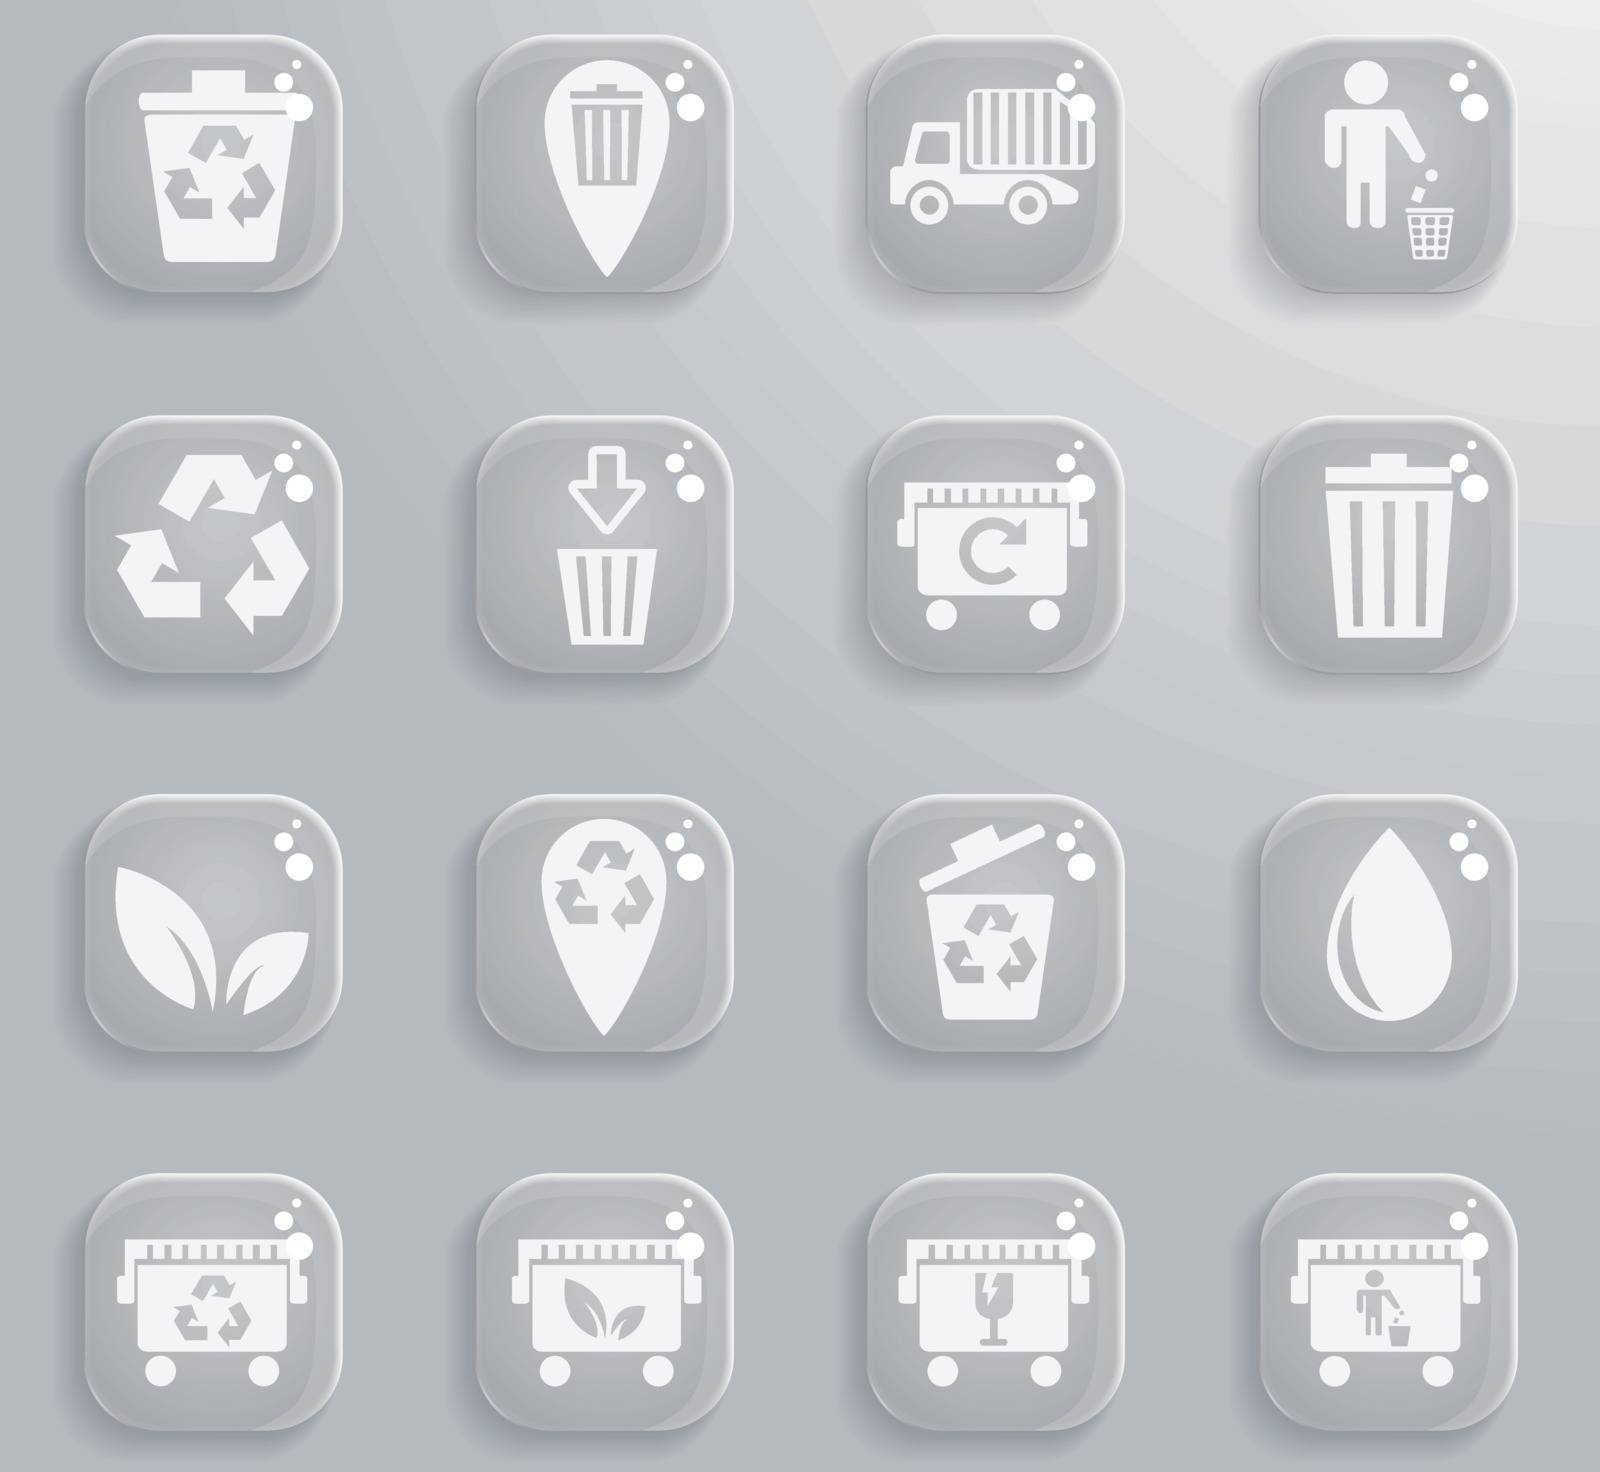 Garbage simply symbol for web icons and user interface